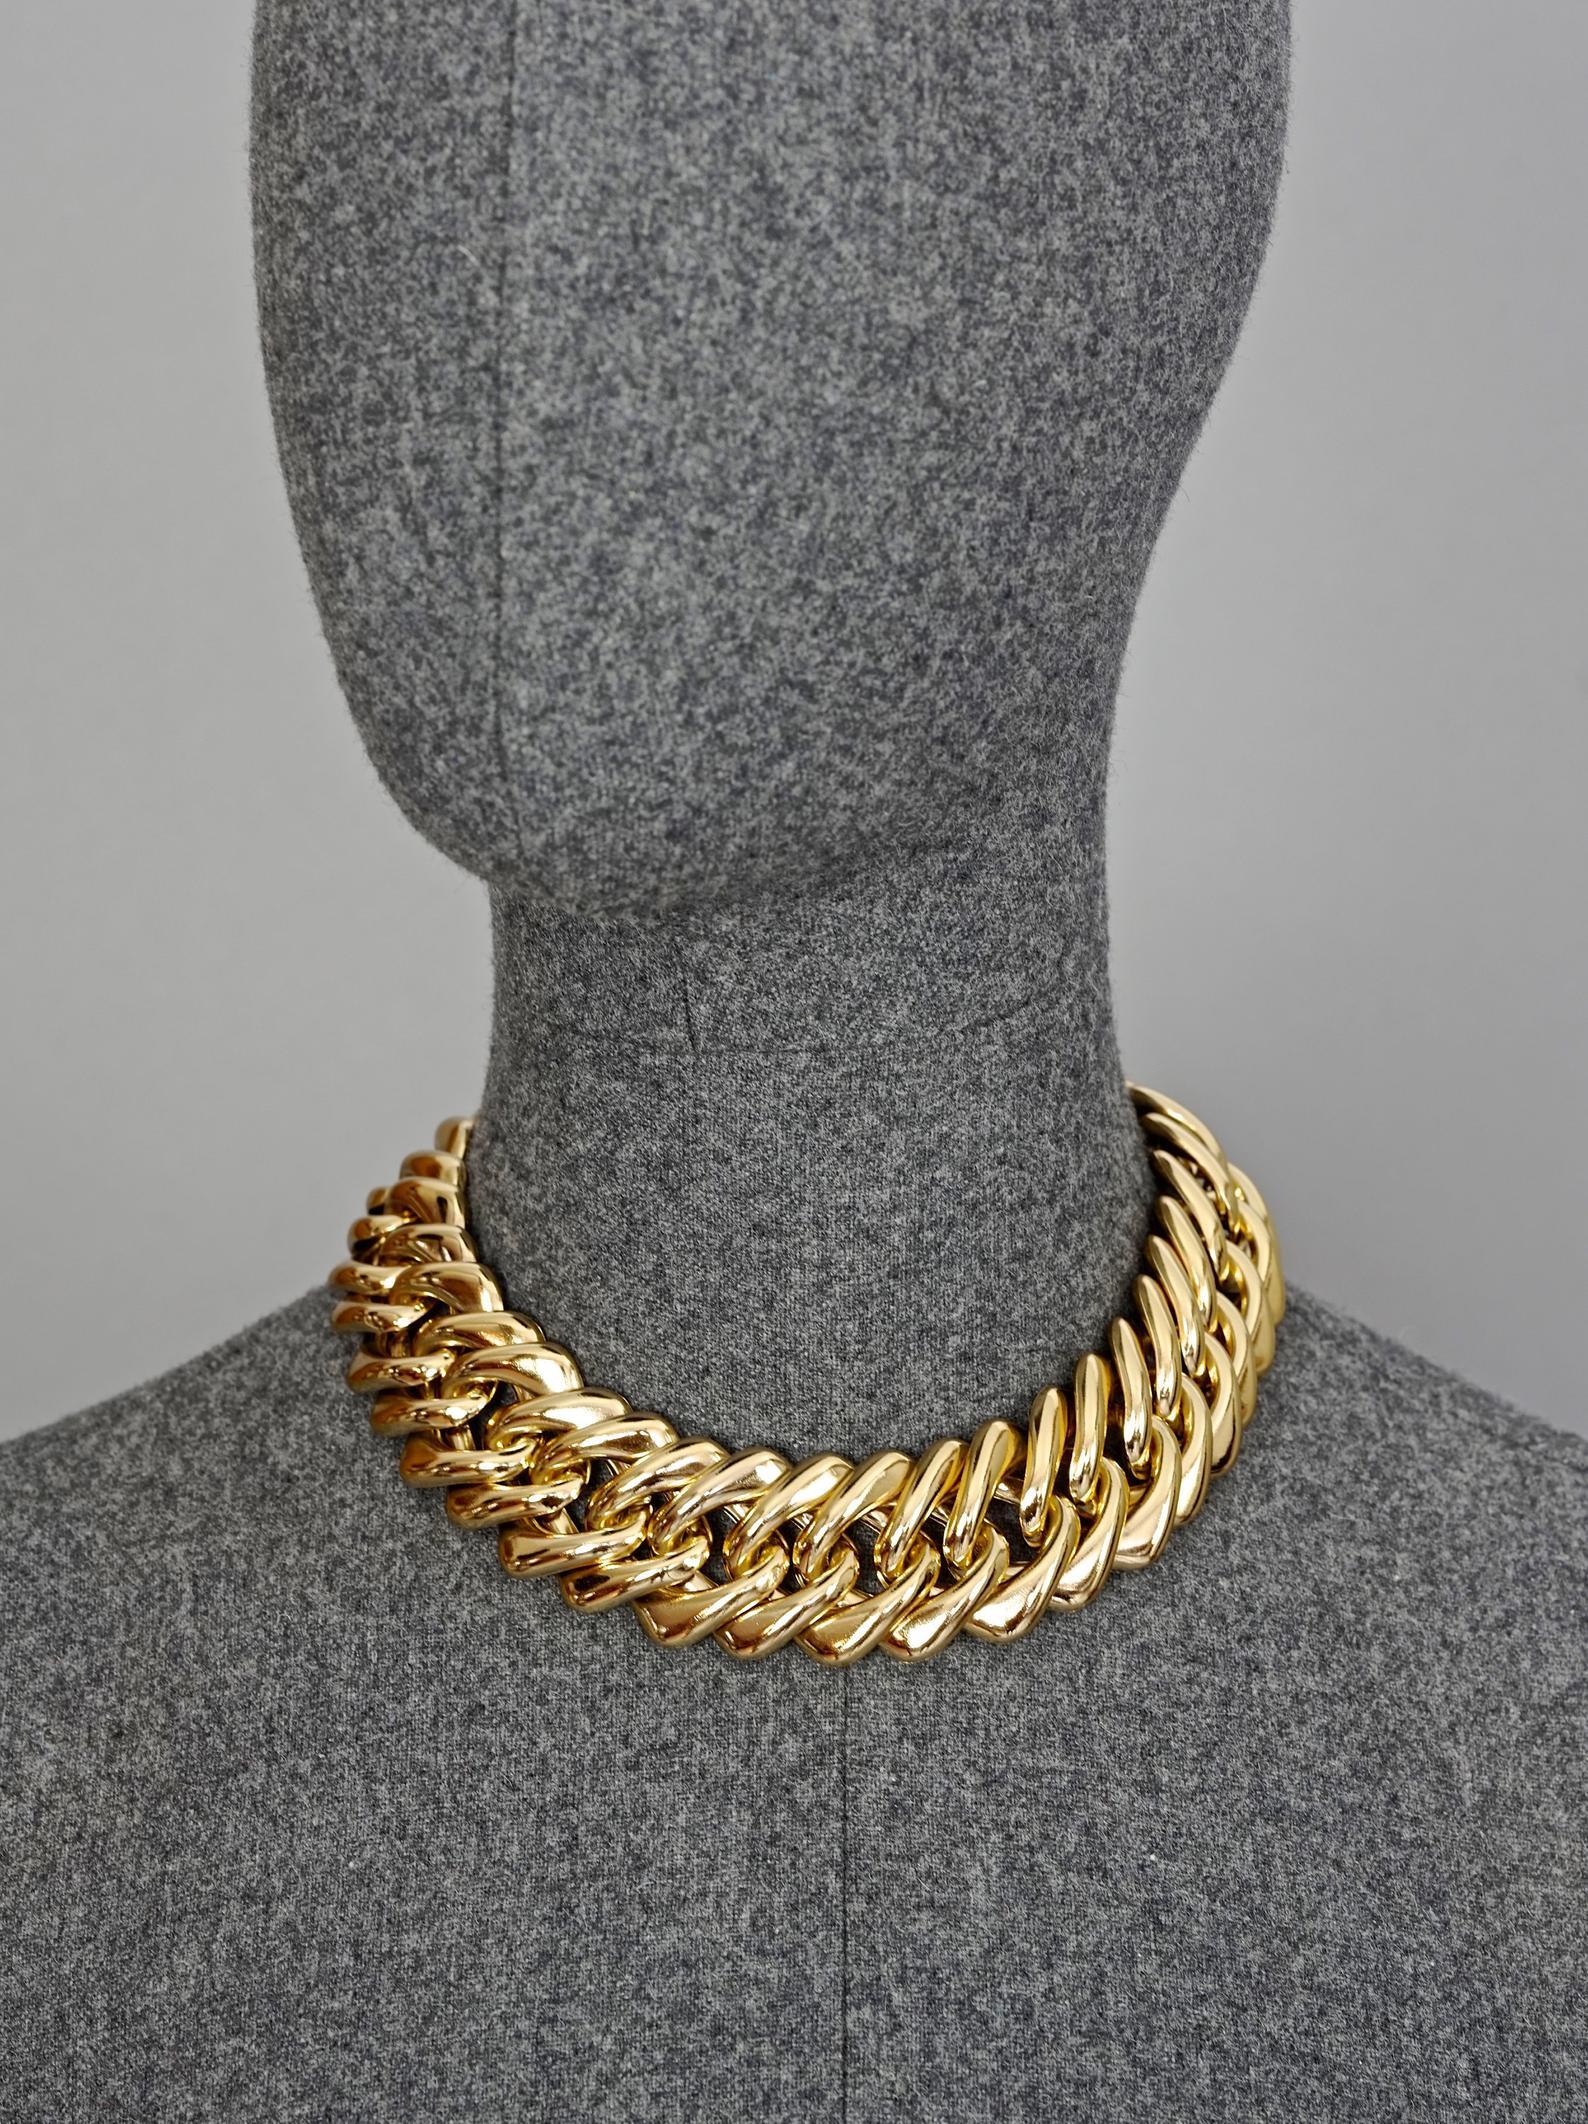 Vintage YVES SAINT LAURENT Ysl by Robert Goossens Chunky Chain Choker Necklace

Measurements:
Height: 1.25 inches (3.2 cm)
Wearable Length: 16.33 inches (41.5 cm)

Features:
- 100% Authentic YVES SAINT LAURENT by Robert Goossens.
- Massive chain in